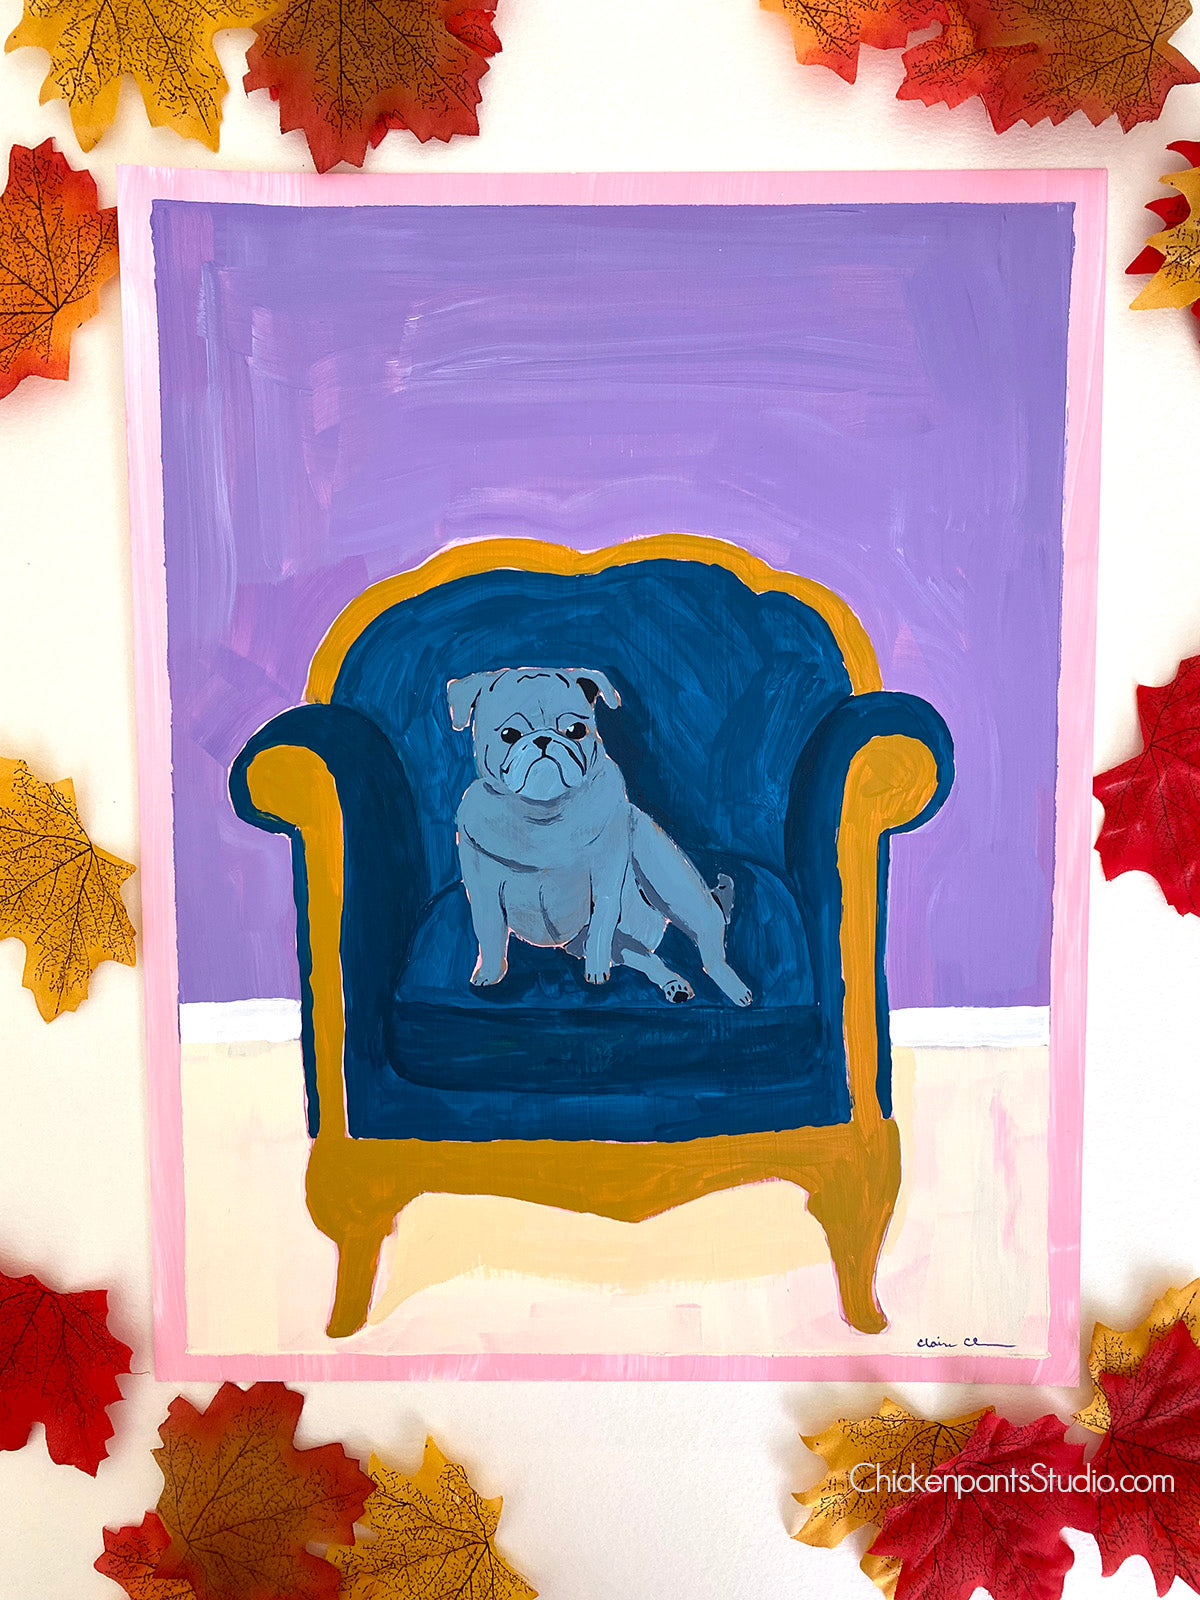 The Blue Chair - Original Pug Painting